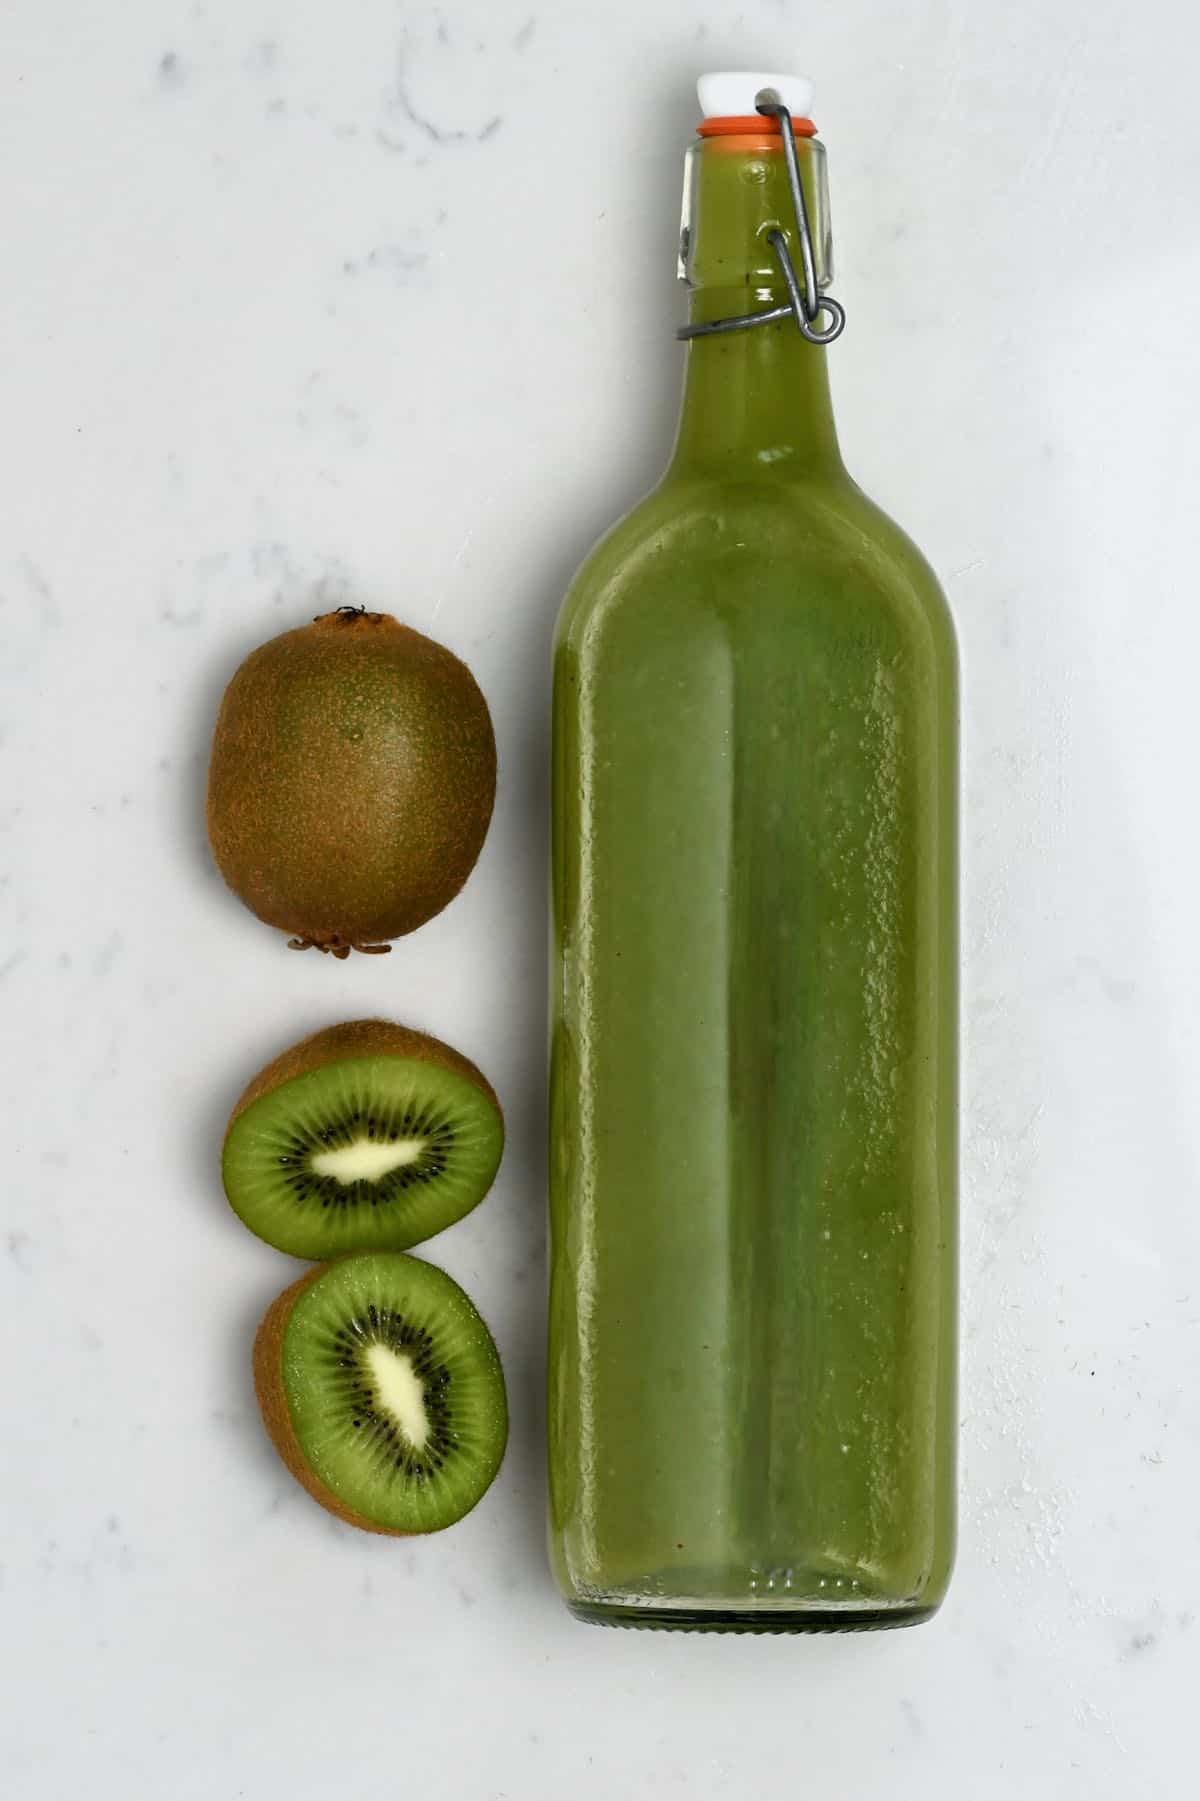 Kiwi juice in a bottle and two kiwis